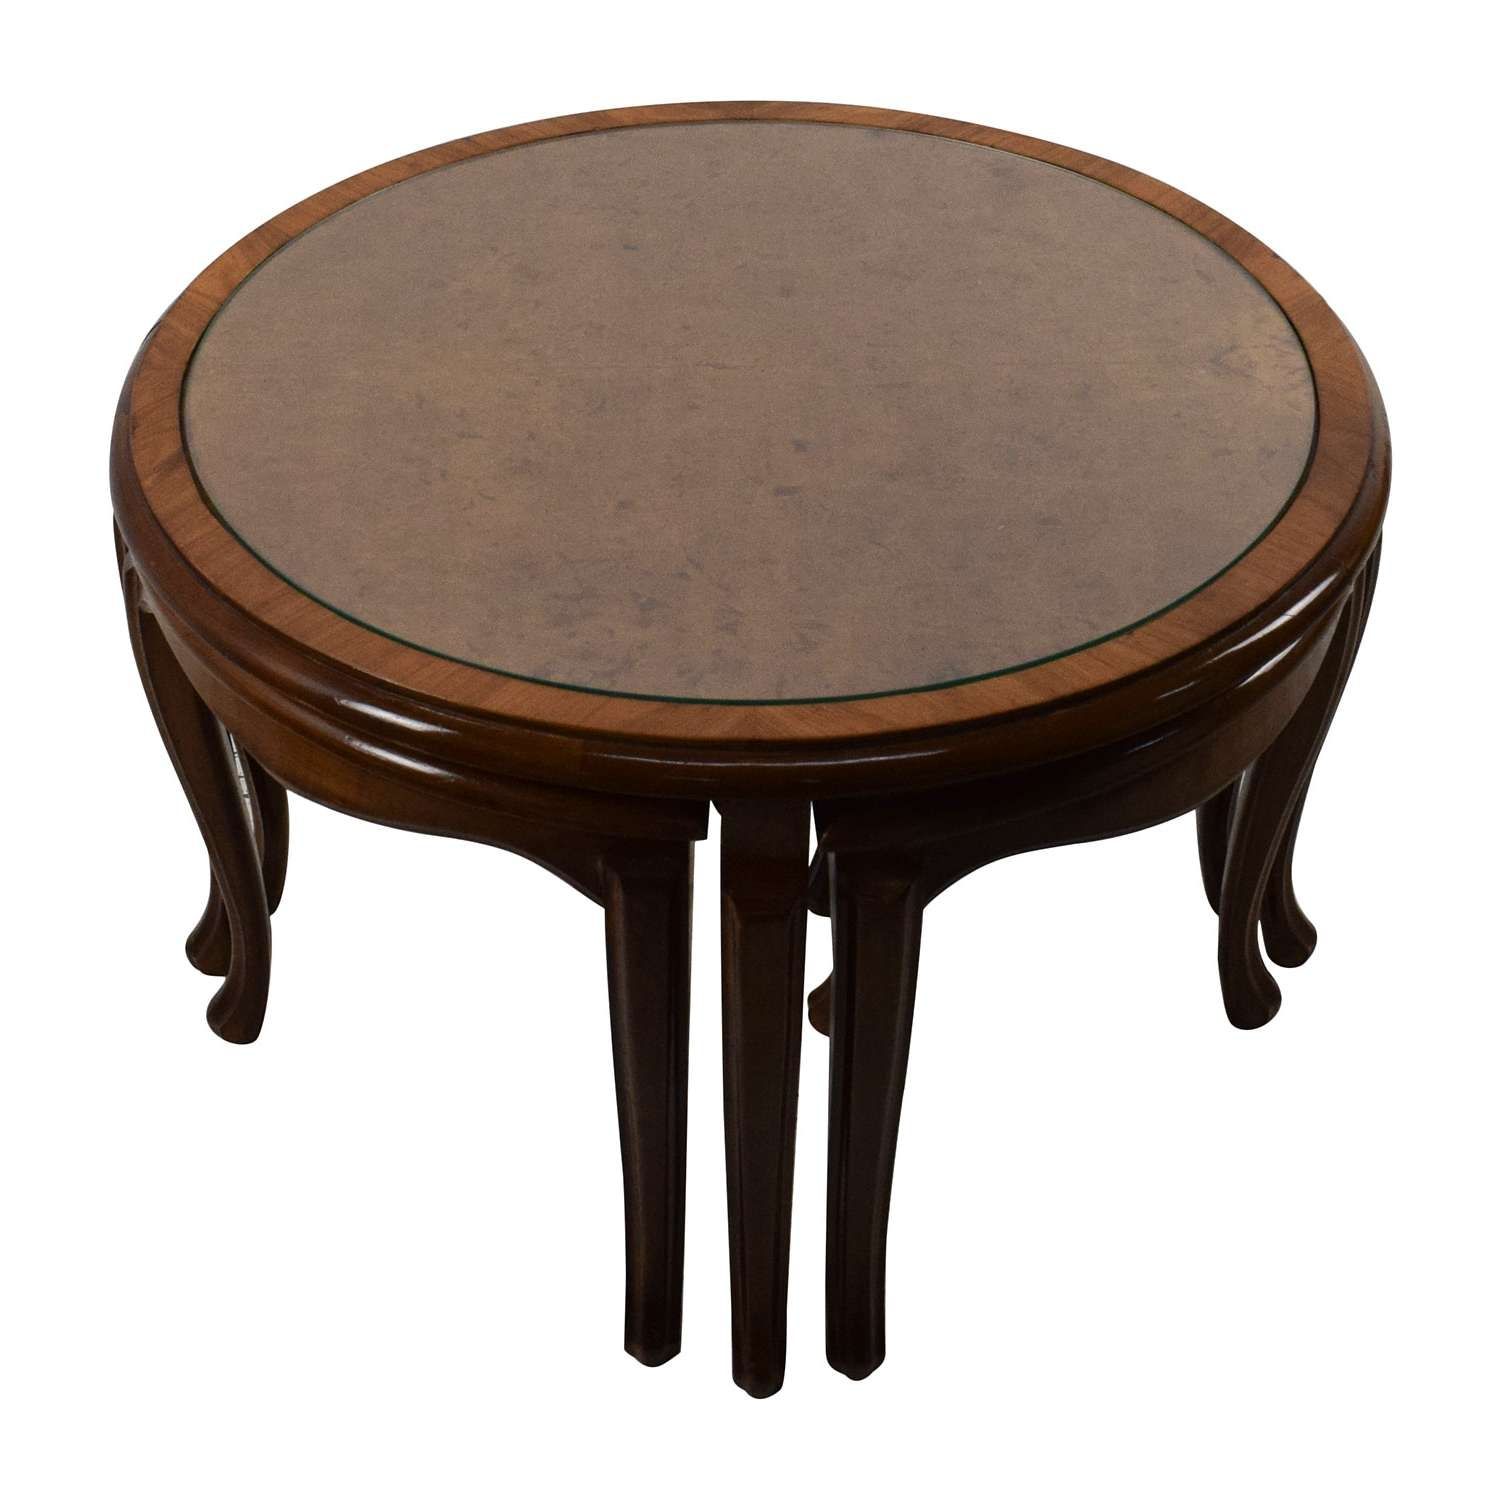 [%recent Coffee Tables With Nesting Stools Pertaining To 69% Off – Round Glass Top Coffee Table With 4 Nesting Stools / Tables|69% Off – Round Glass Top Coffee Table With 4 Nesting Stools / Tables Pertaining To Recent Coffee Tables With Nesting Stools%] (View 17 of 20)